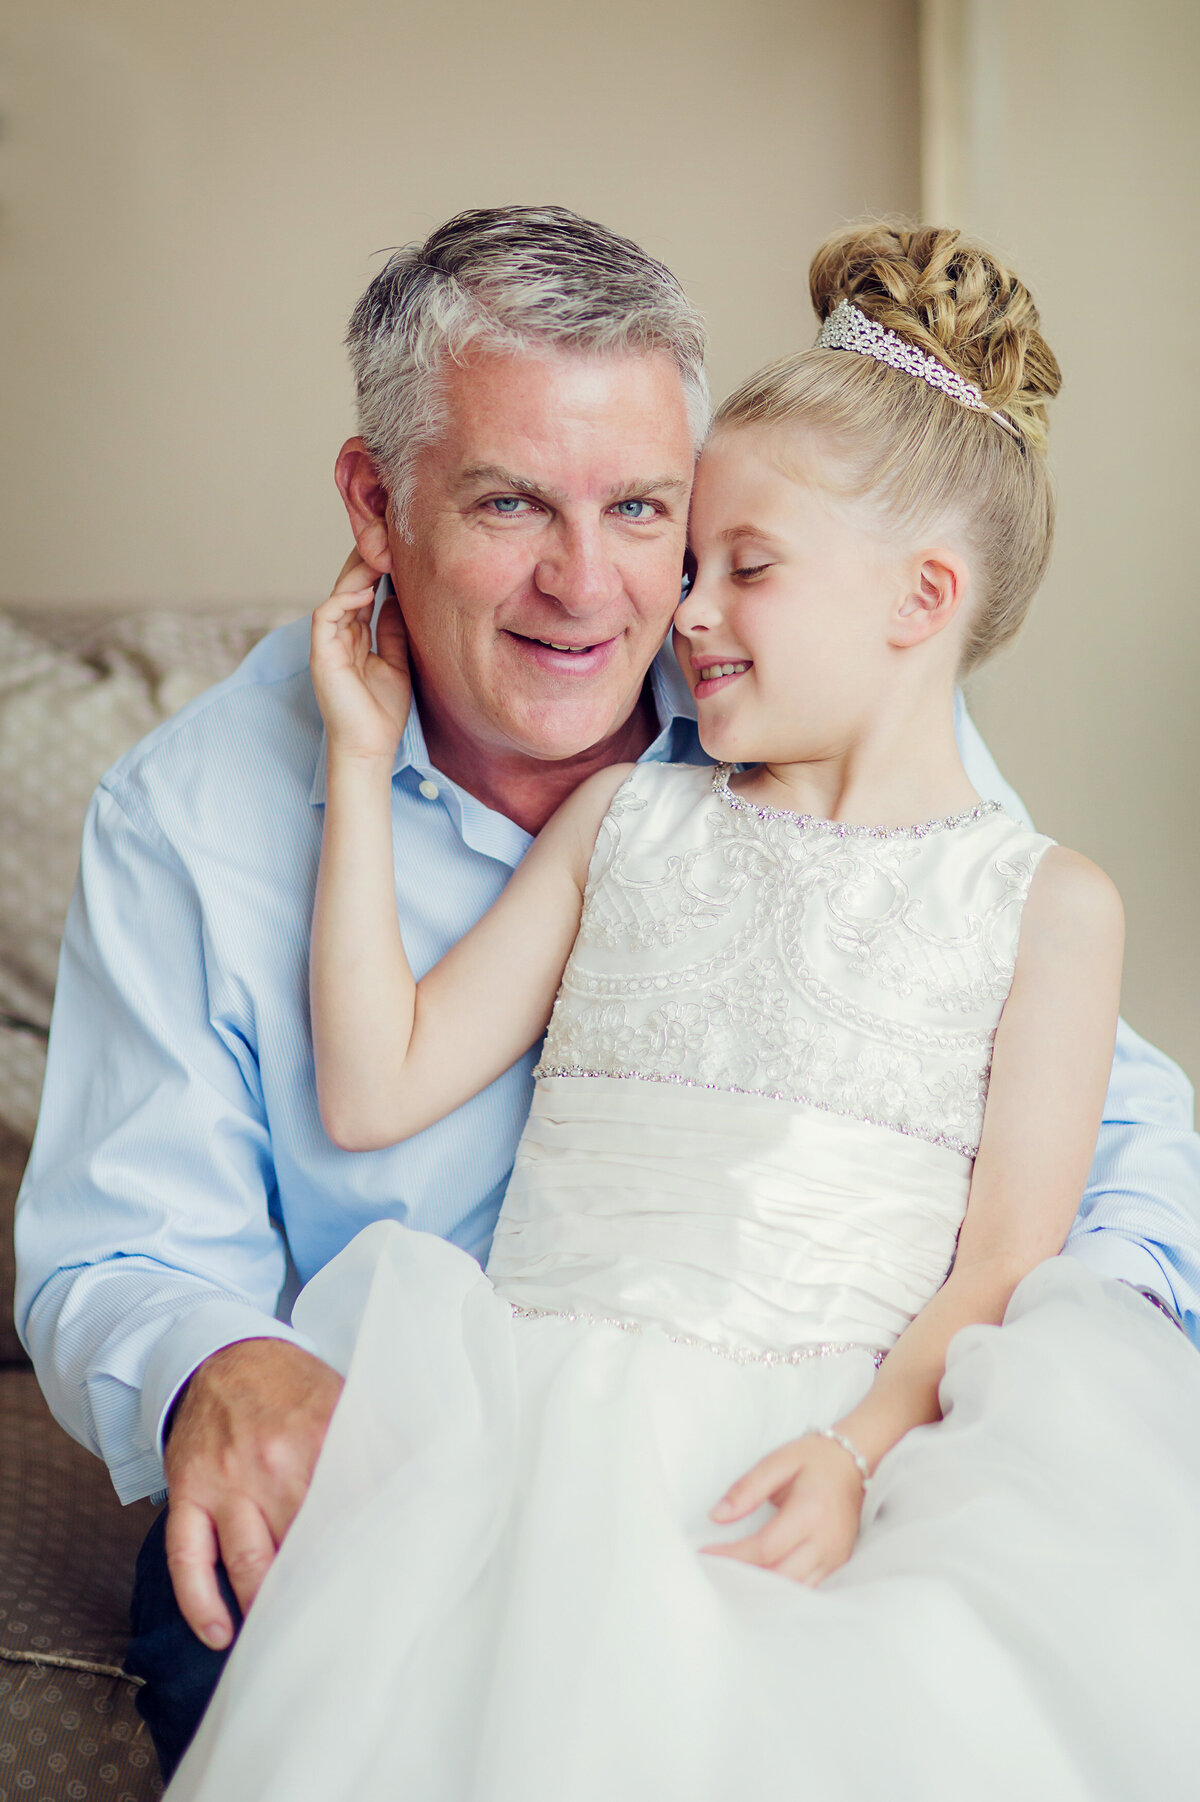 Communion Day for Kiley, and she is snuggling into Dad,. They are both dressed up.